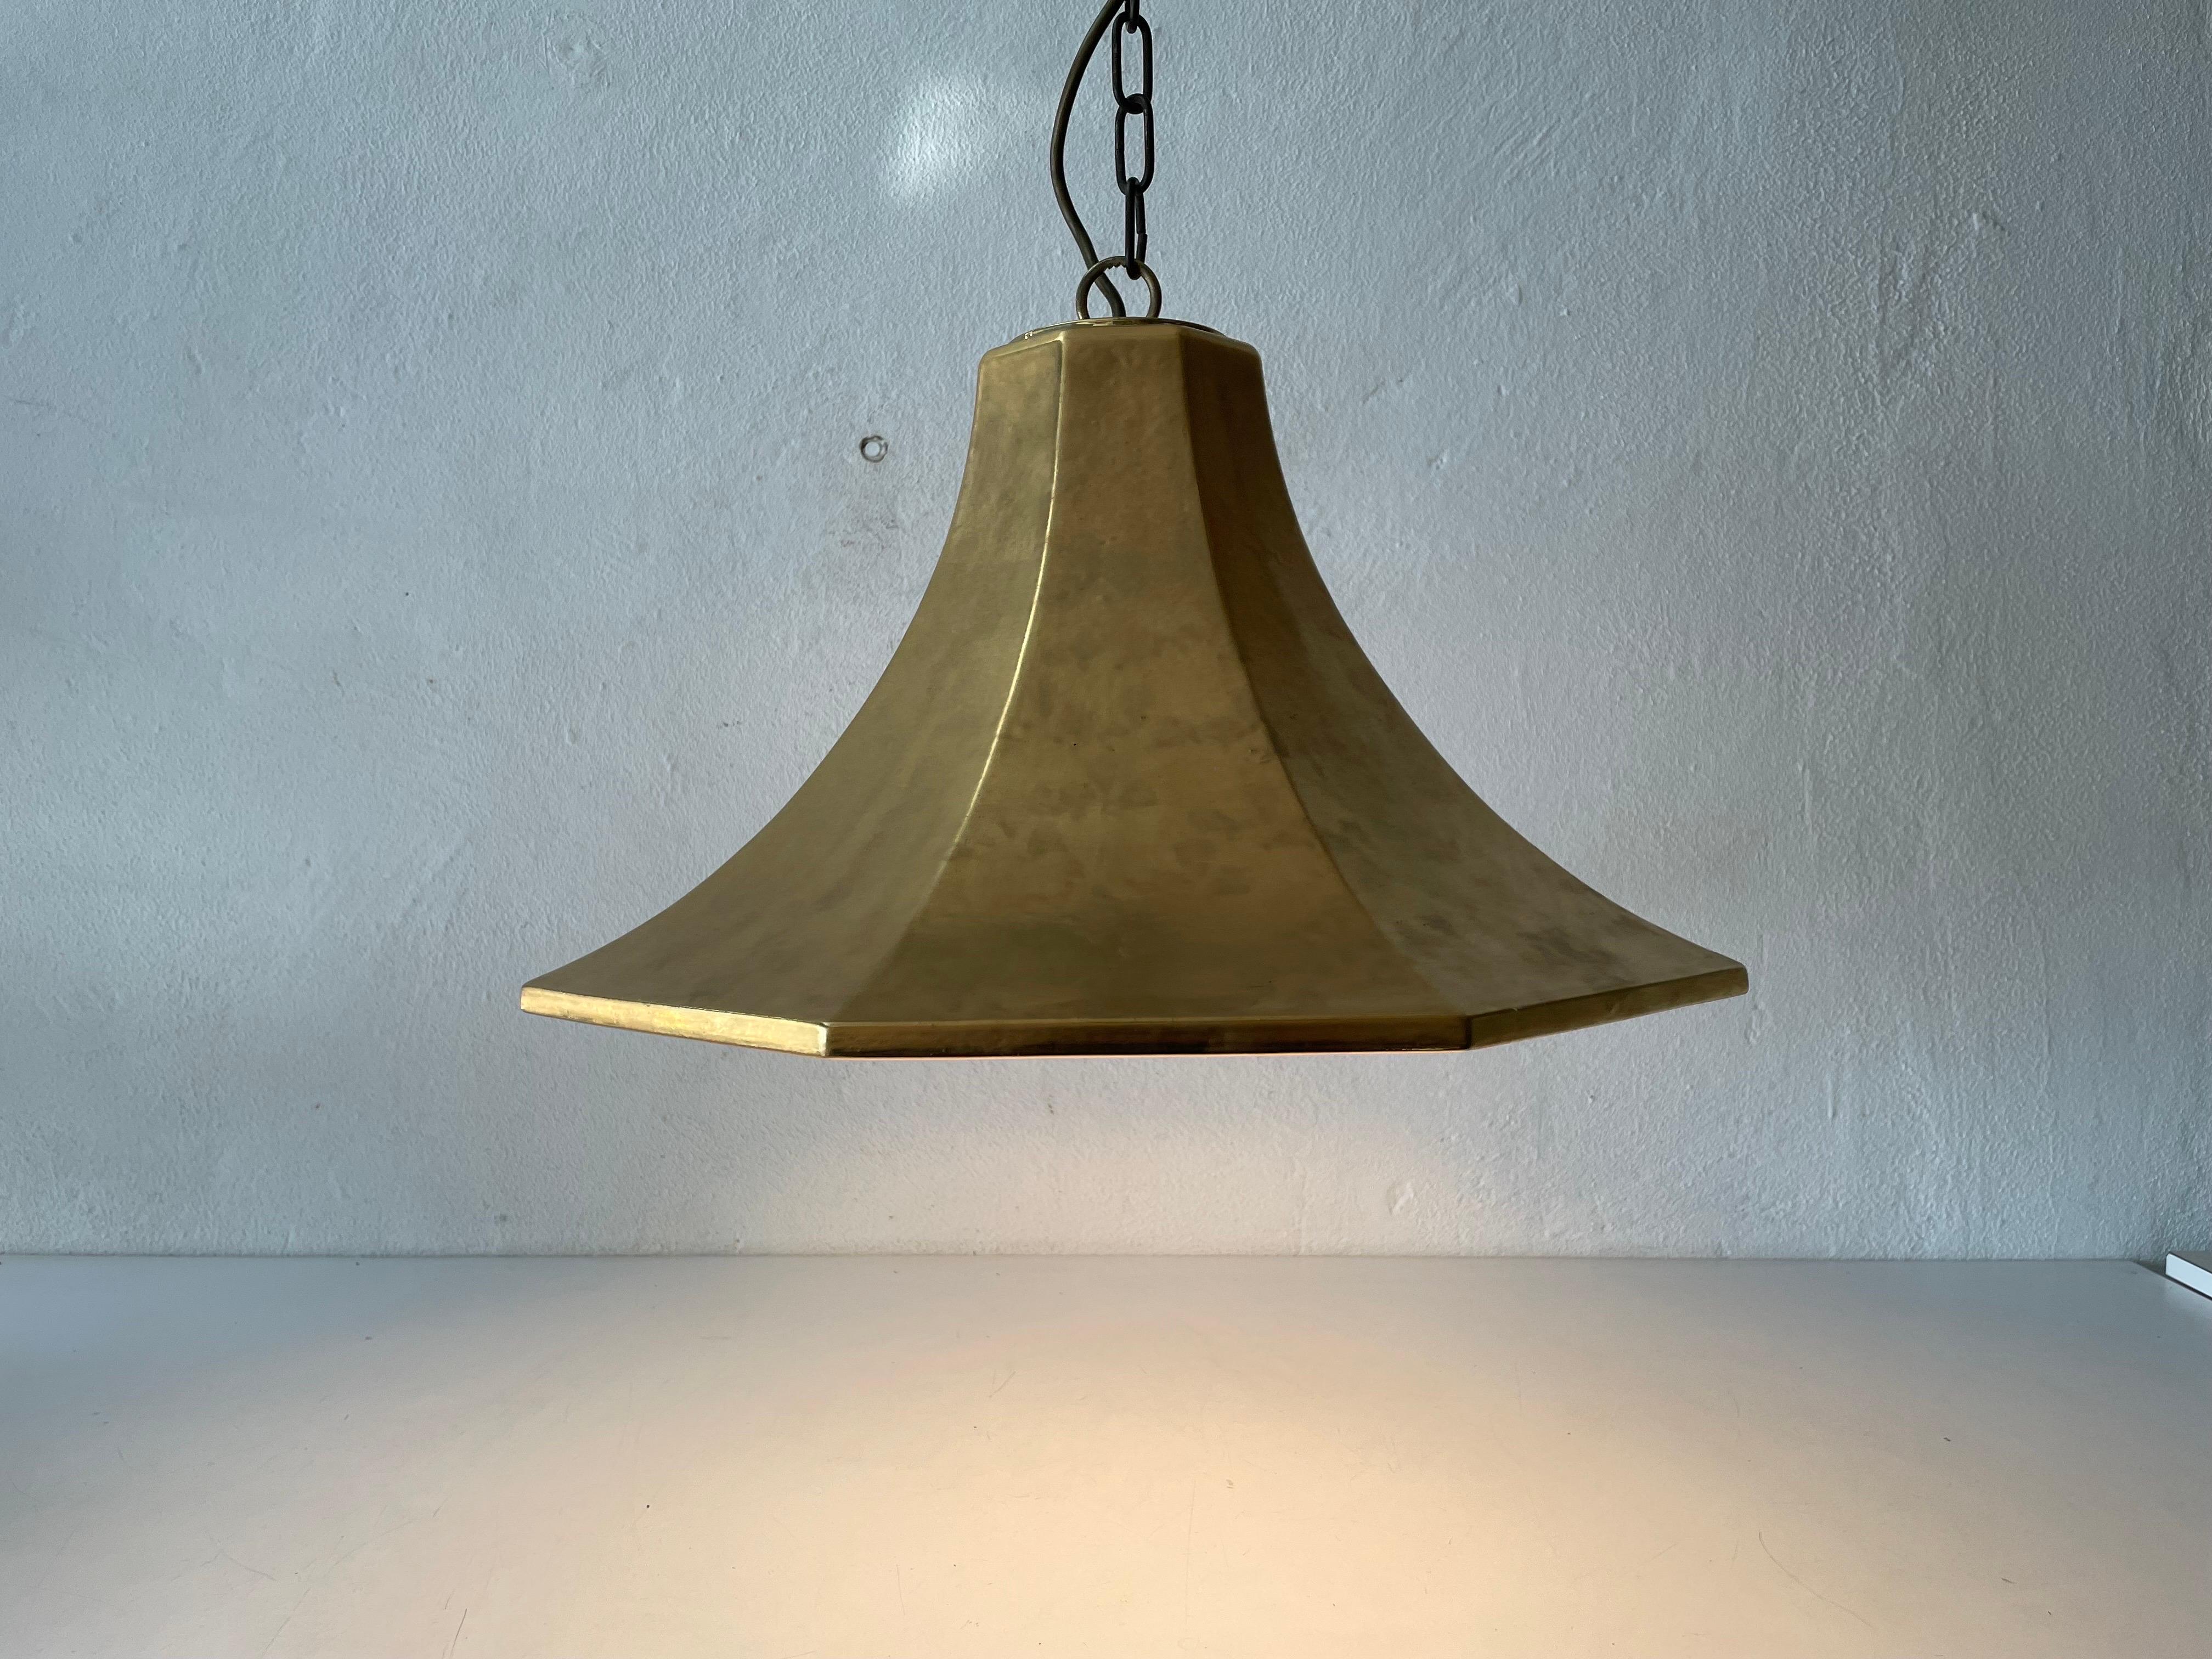 Exclusive Gold Ceramic Pendant Lamp by Licht+Wohnen, Karlsruhe, 1970s, Germany For Sale 2